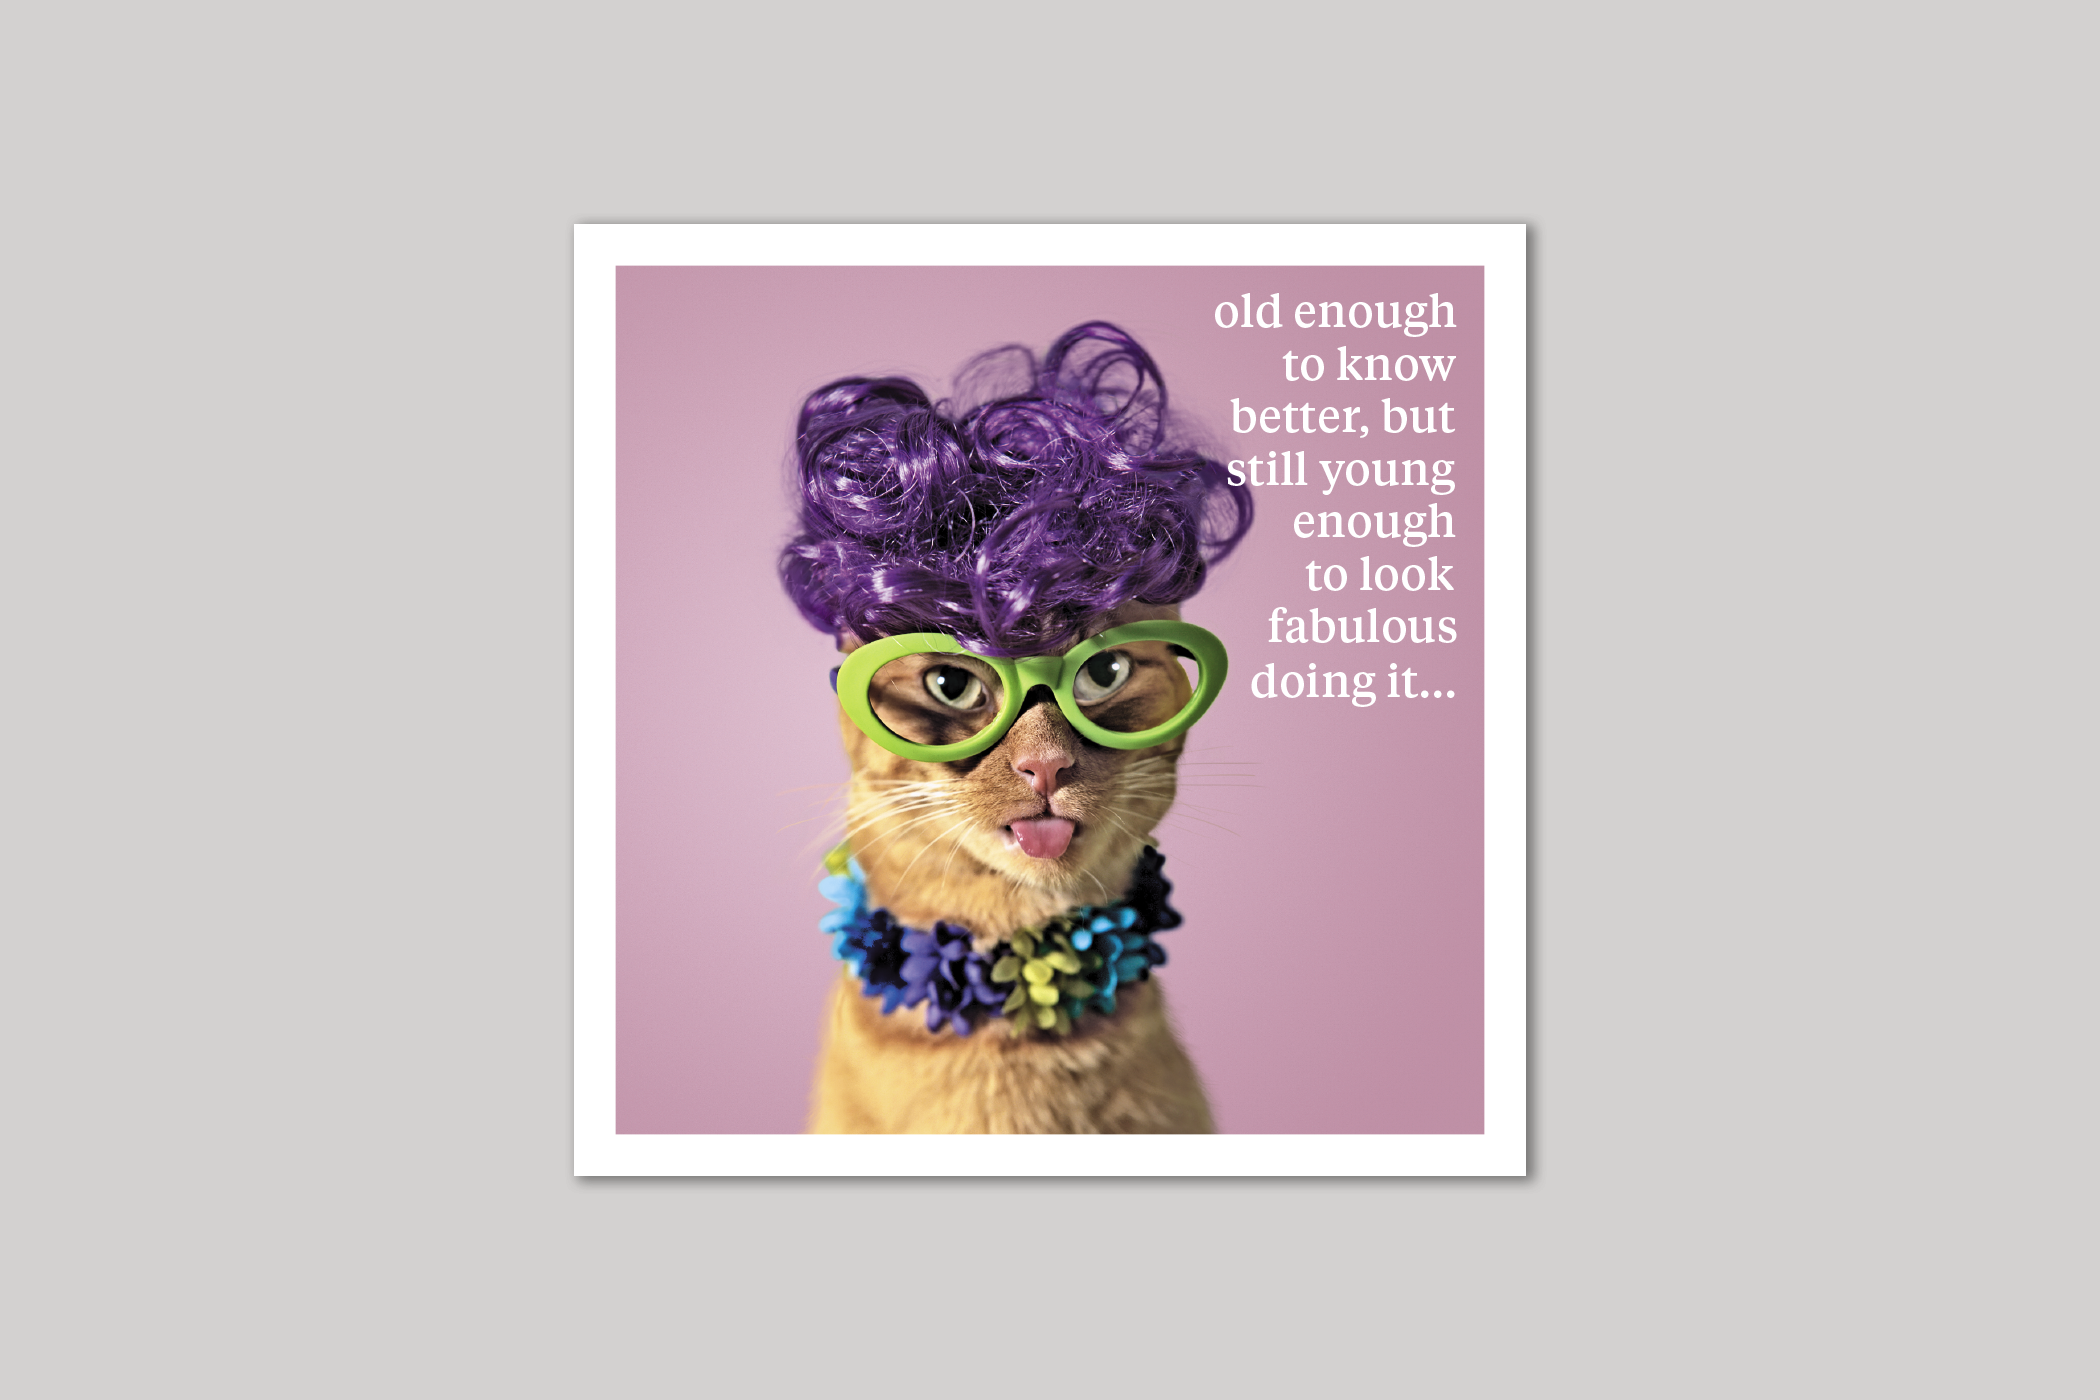 Still Young quirky animal portrait from Curious World range of greeting cards by Icon.